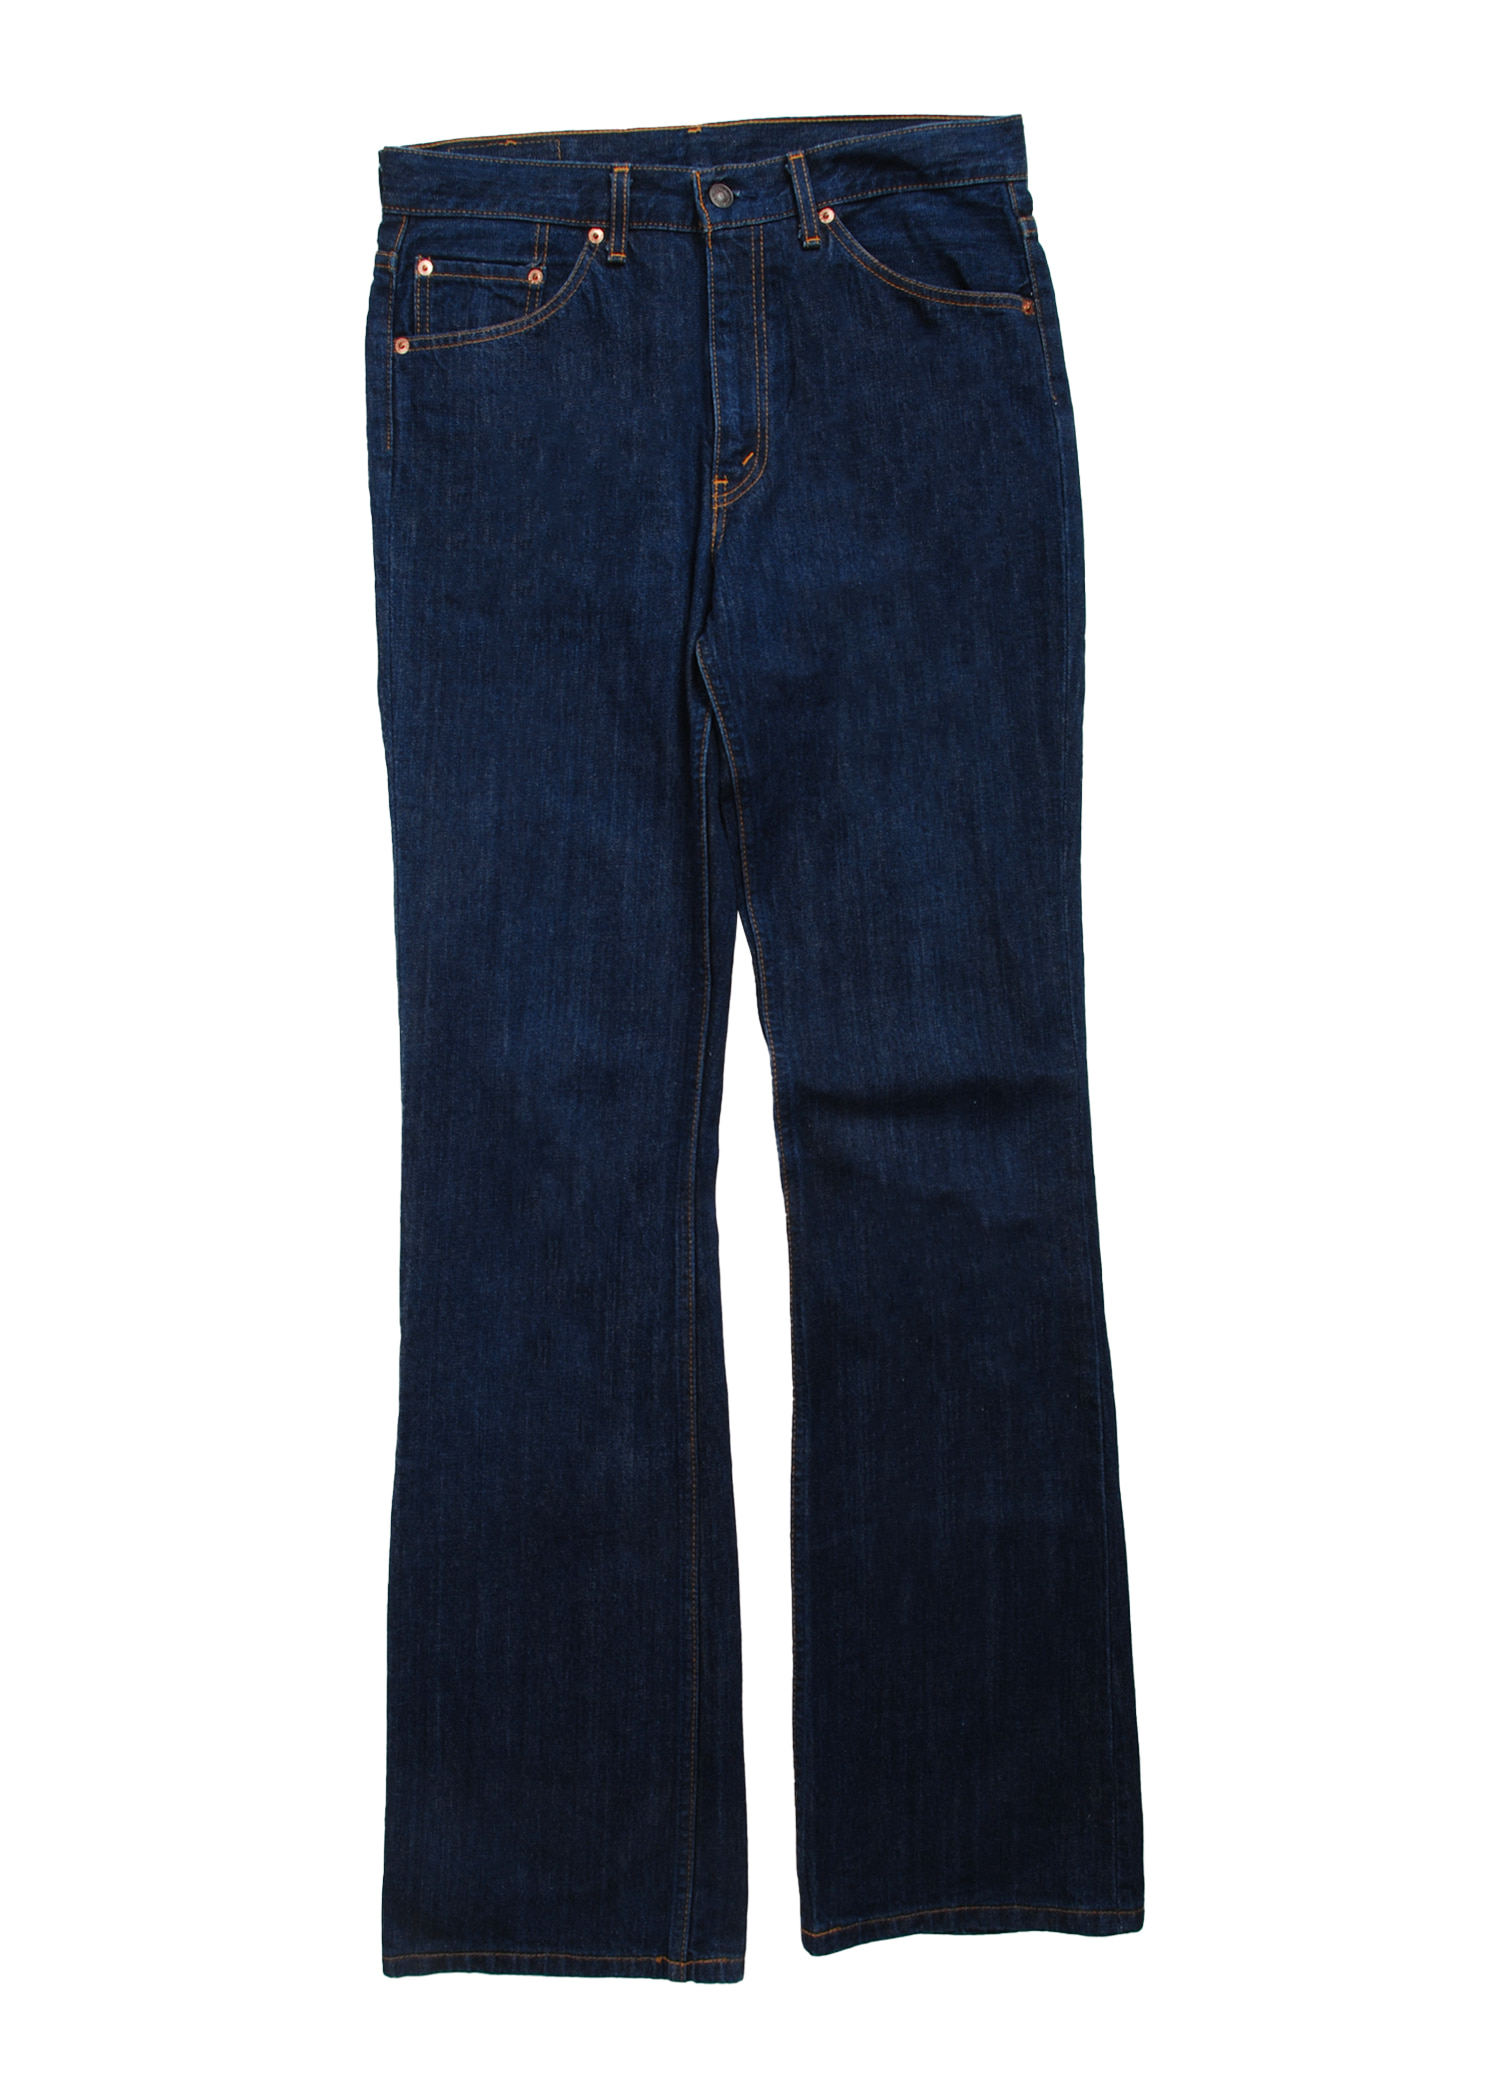 Levis 517-03 (made in japan)